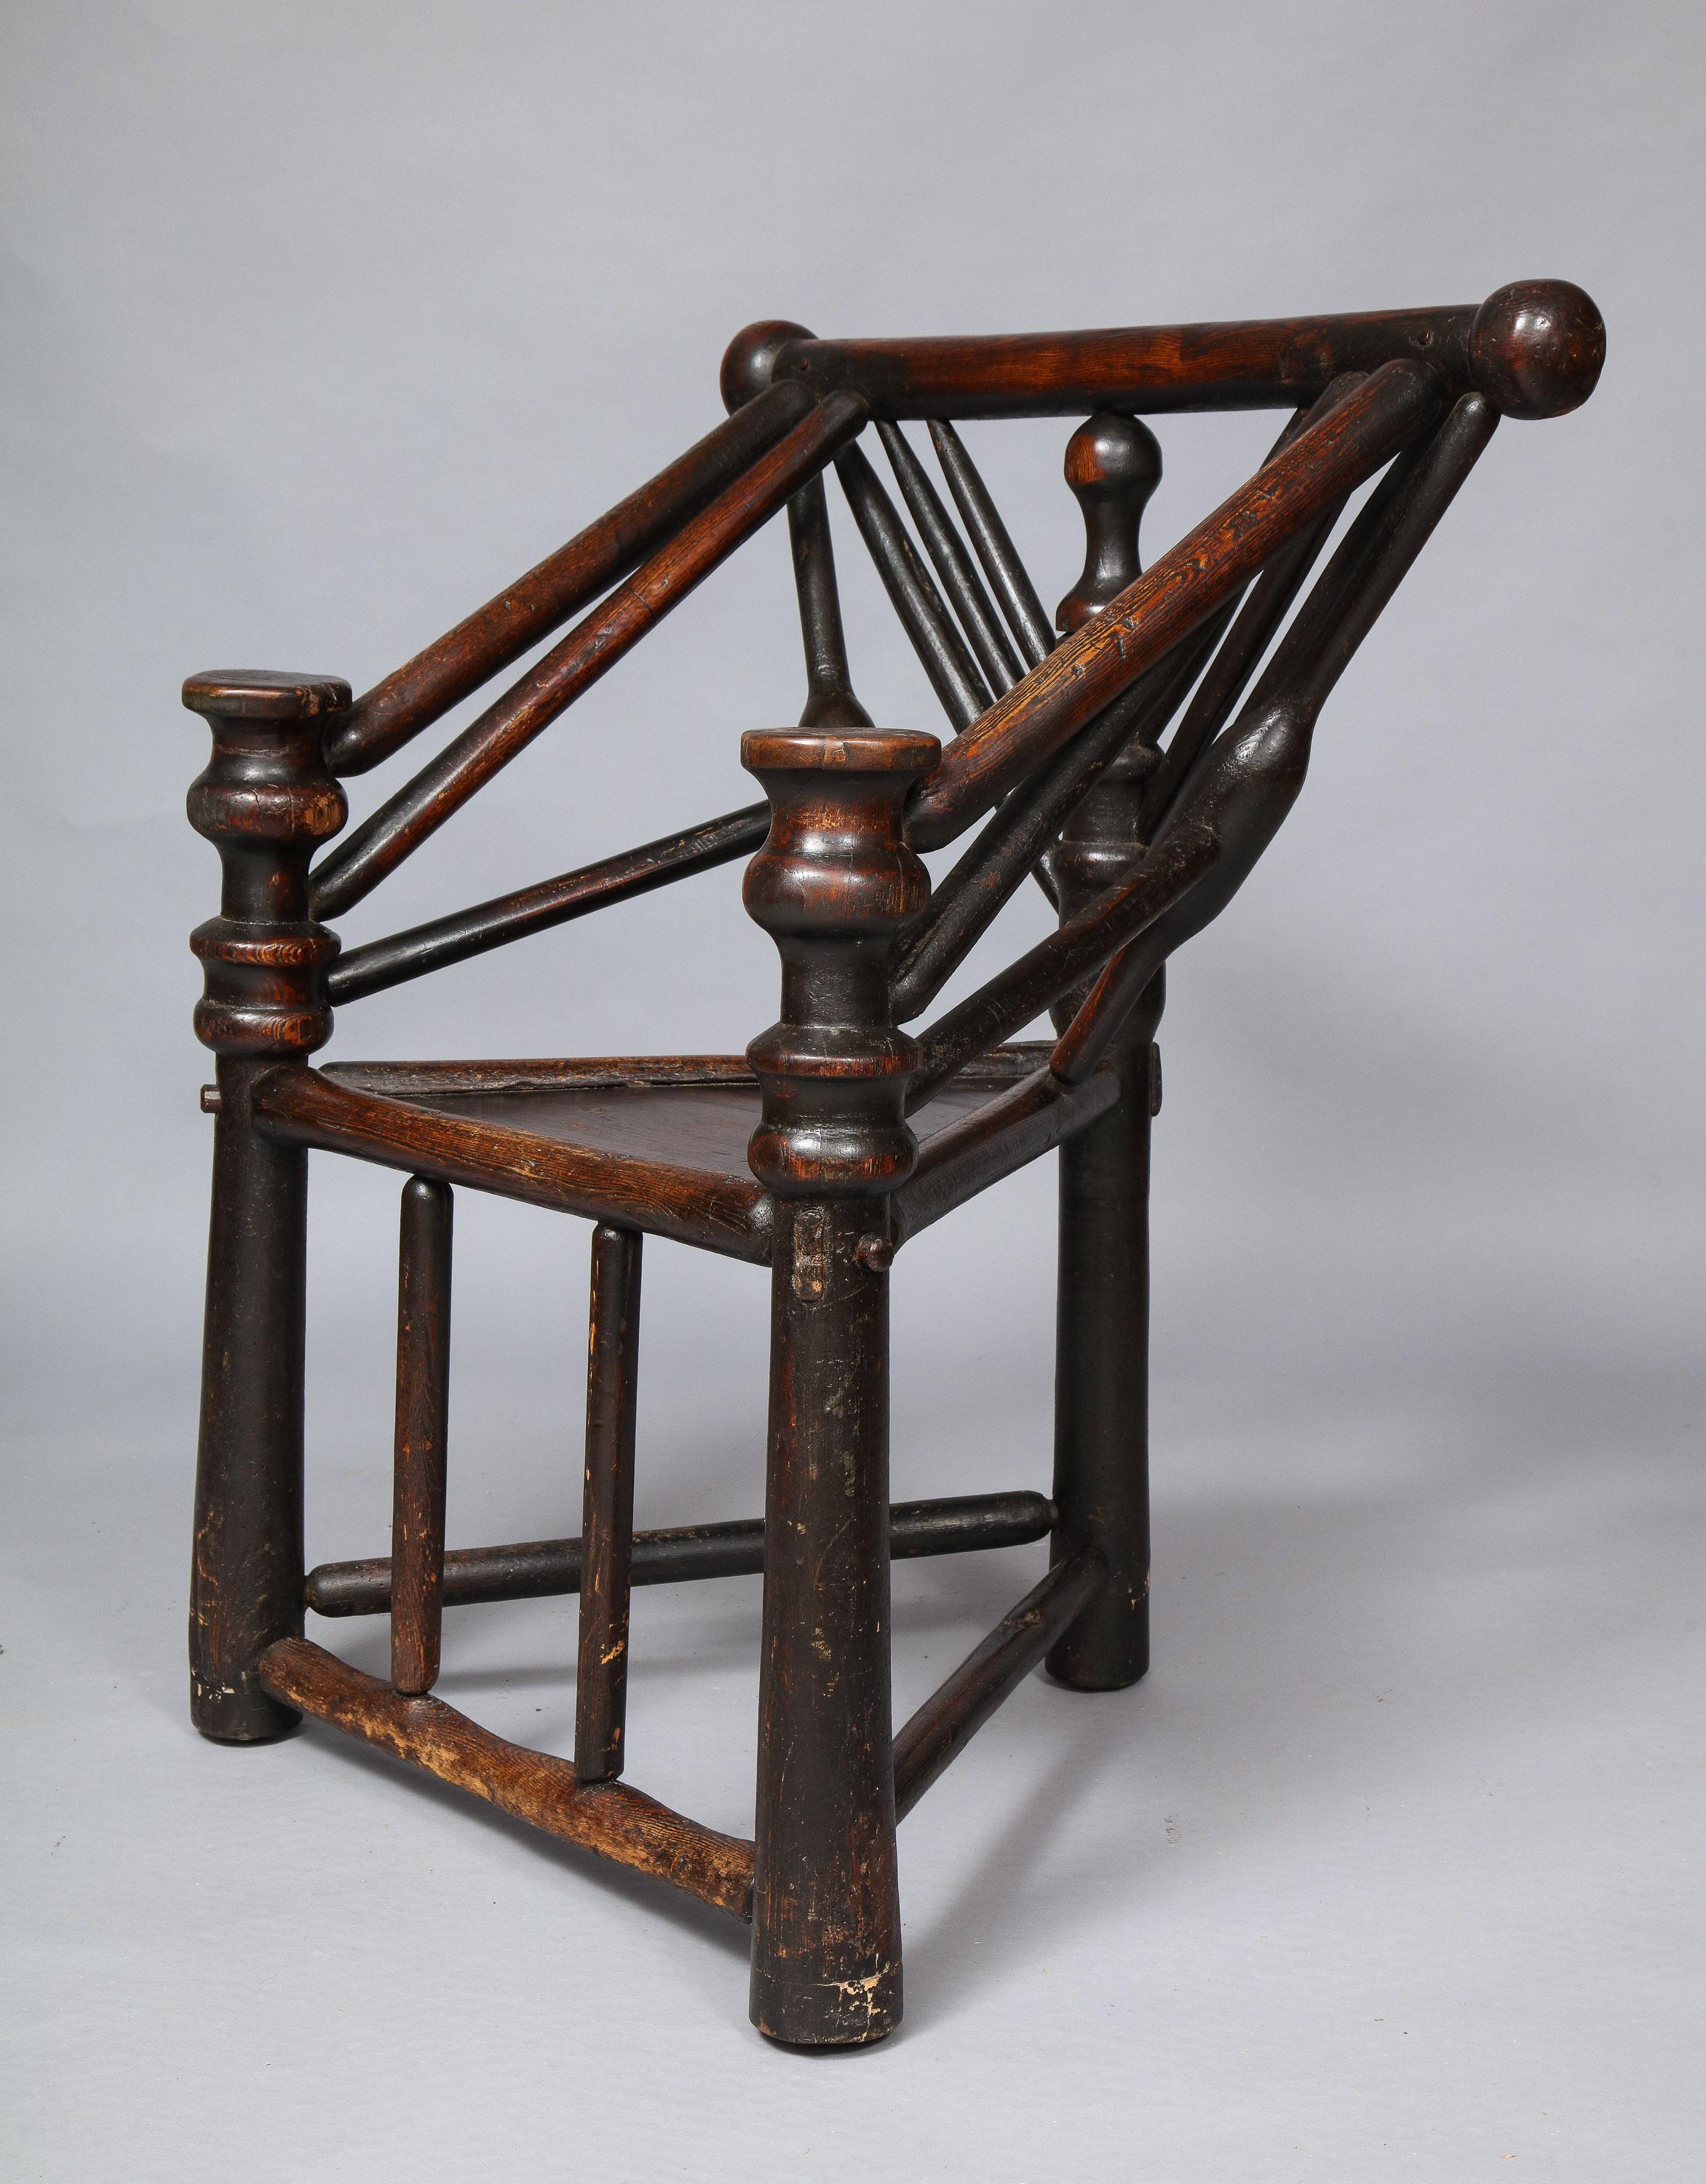 Rare Elizabethan or Jacobean turned fruitwood and ash three legged chair, often referred to as a 